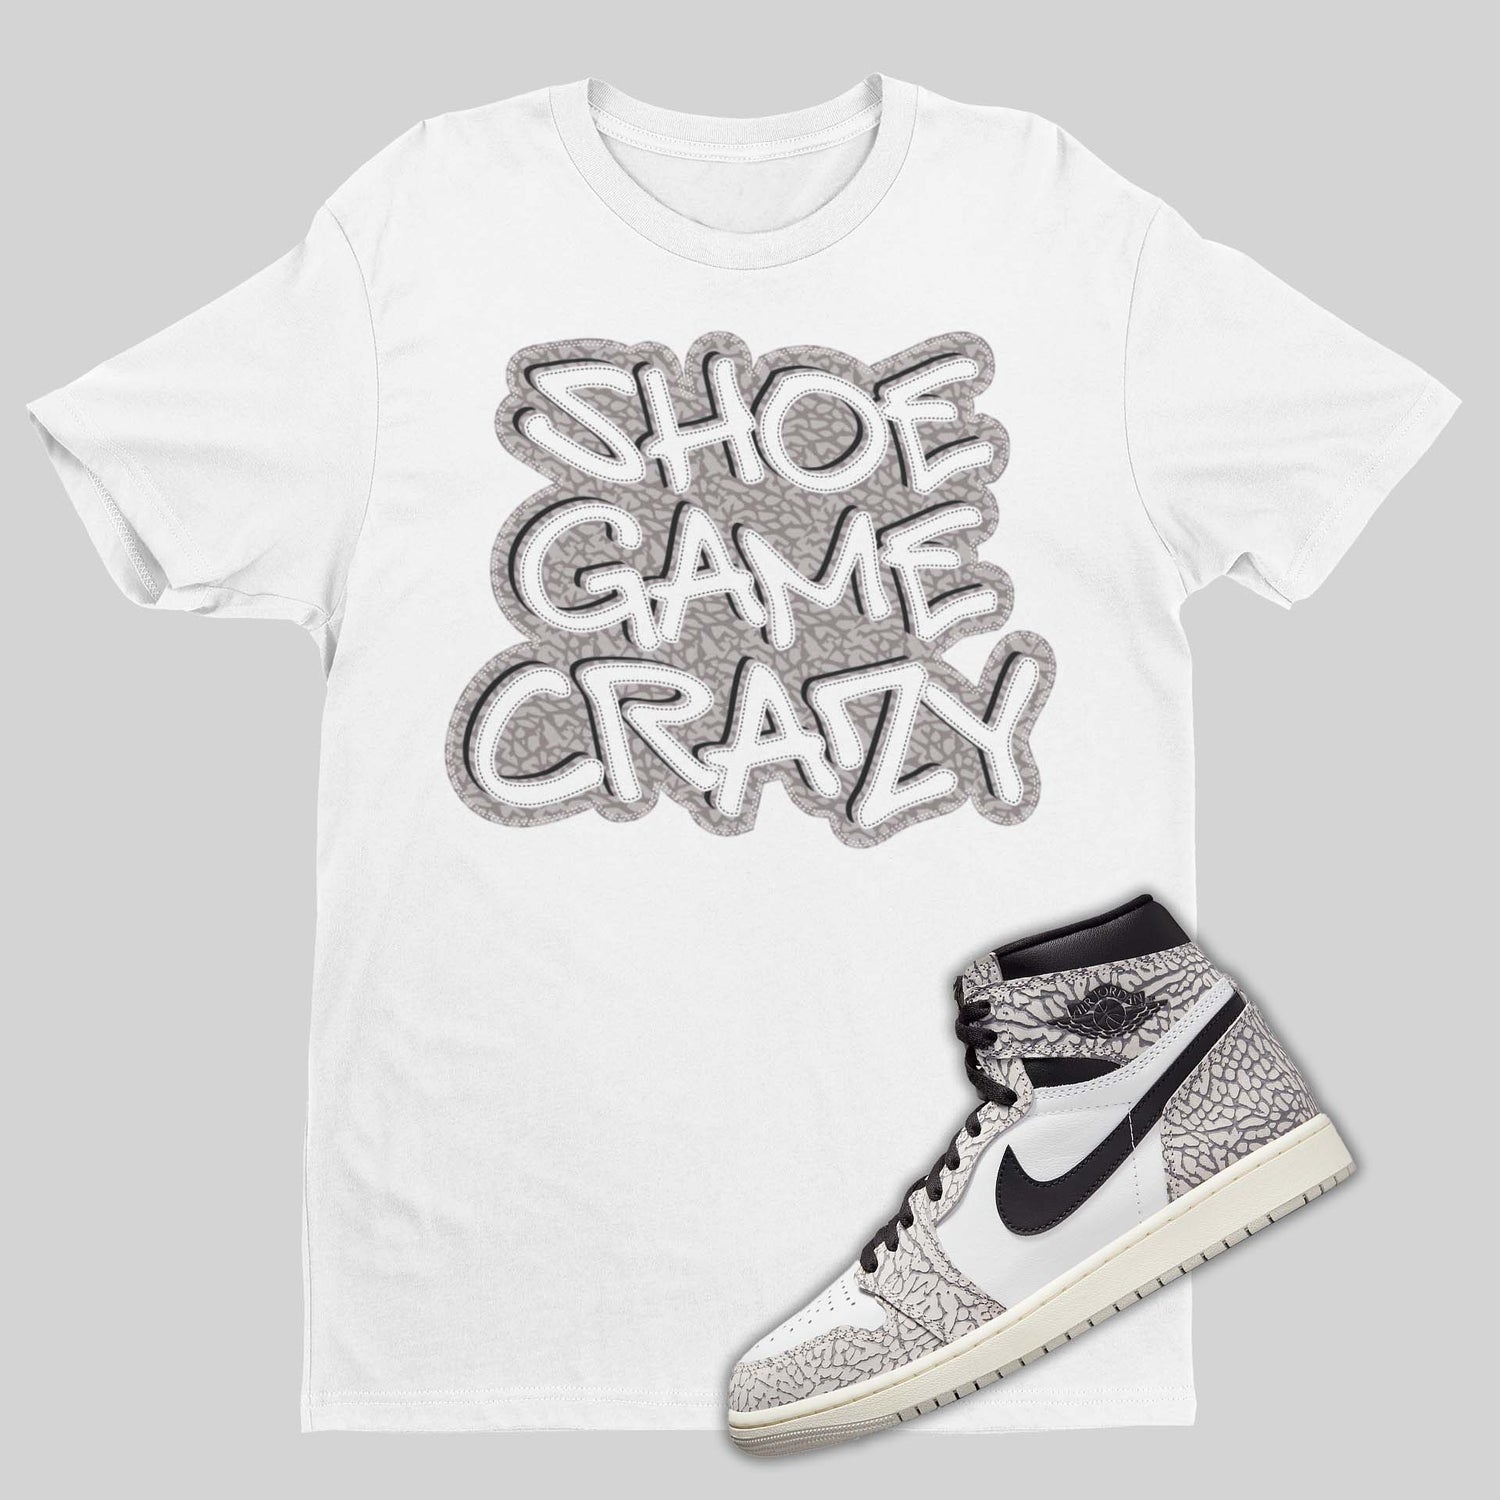 The perfect hip-hop white shirt to match your sneakers! Our Match Jordan 1 t-shirt is made to compliment your kicks. Bring your sneakers to the next level with this Elephant Print Air Jordan 1 shirt. Match and feel trendy with this graphic tee!